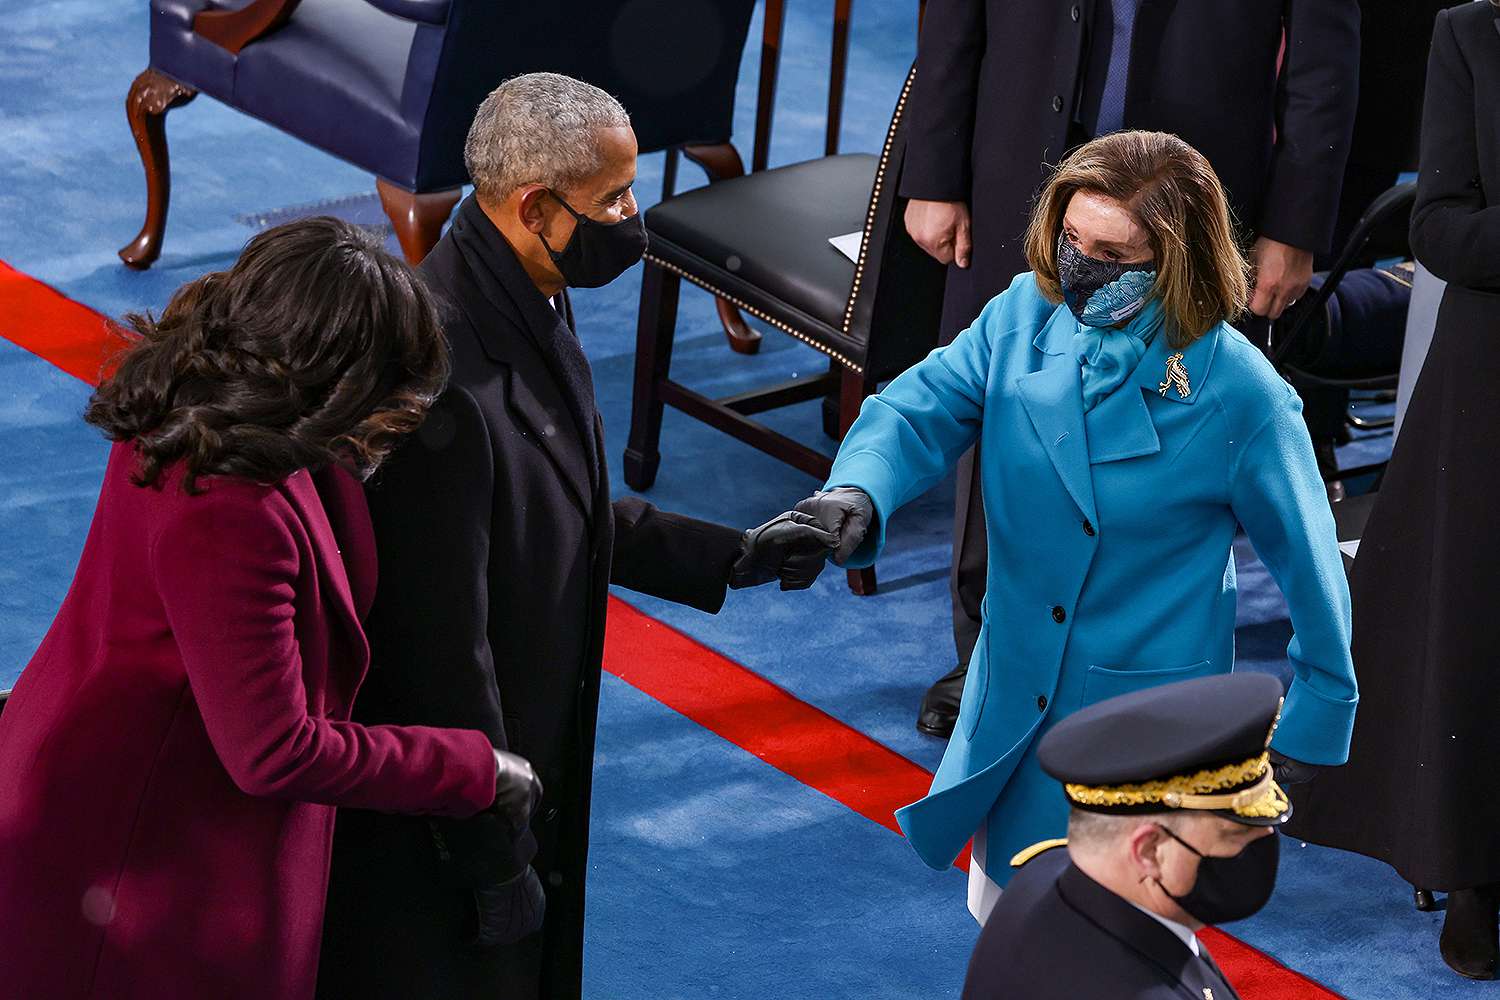 WASHINGTON, DC - JANUARY 20: Former U.S. President Barack Obama and former first lady Michelle Obama greet Speaker of the House Nancy Pelosi (D-CA) at the inauguration of U.S. President-elect Joe Biden on the West Front of the U.S. Capitol on January 20, 2021 in Washington, DC. During today's inauguration ceremony Joe Biden becomes the 46th president of the United States. (Photo by Tasos Katopodis/Getty Images)